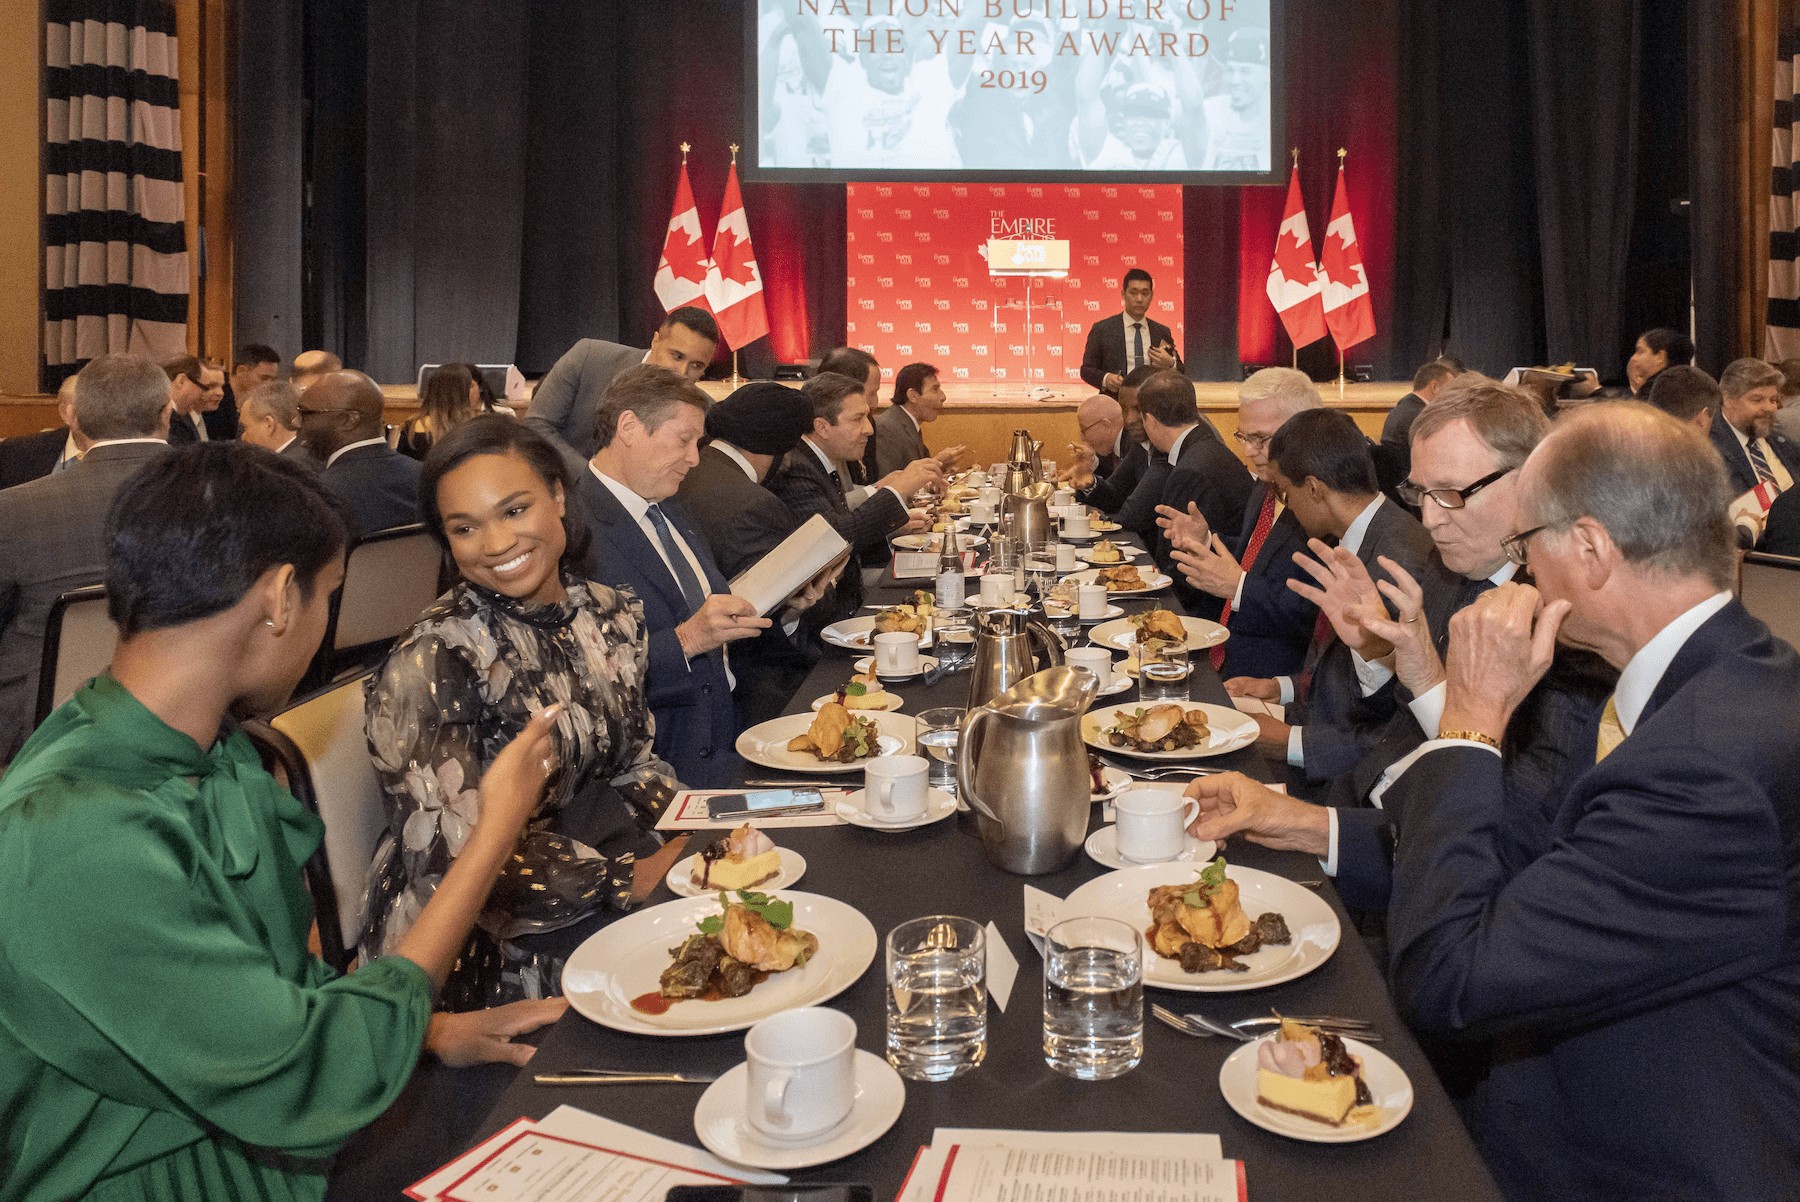 alt= Smiling professional woman sitting at at an event table with food and other Nation Builder 2019 attendees.